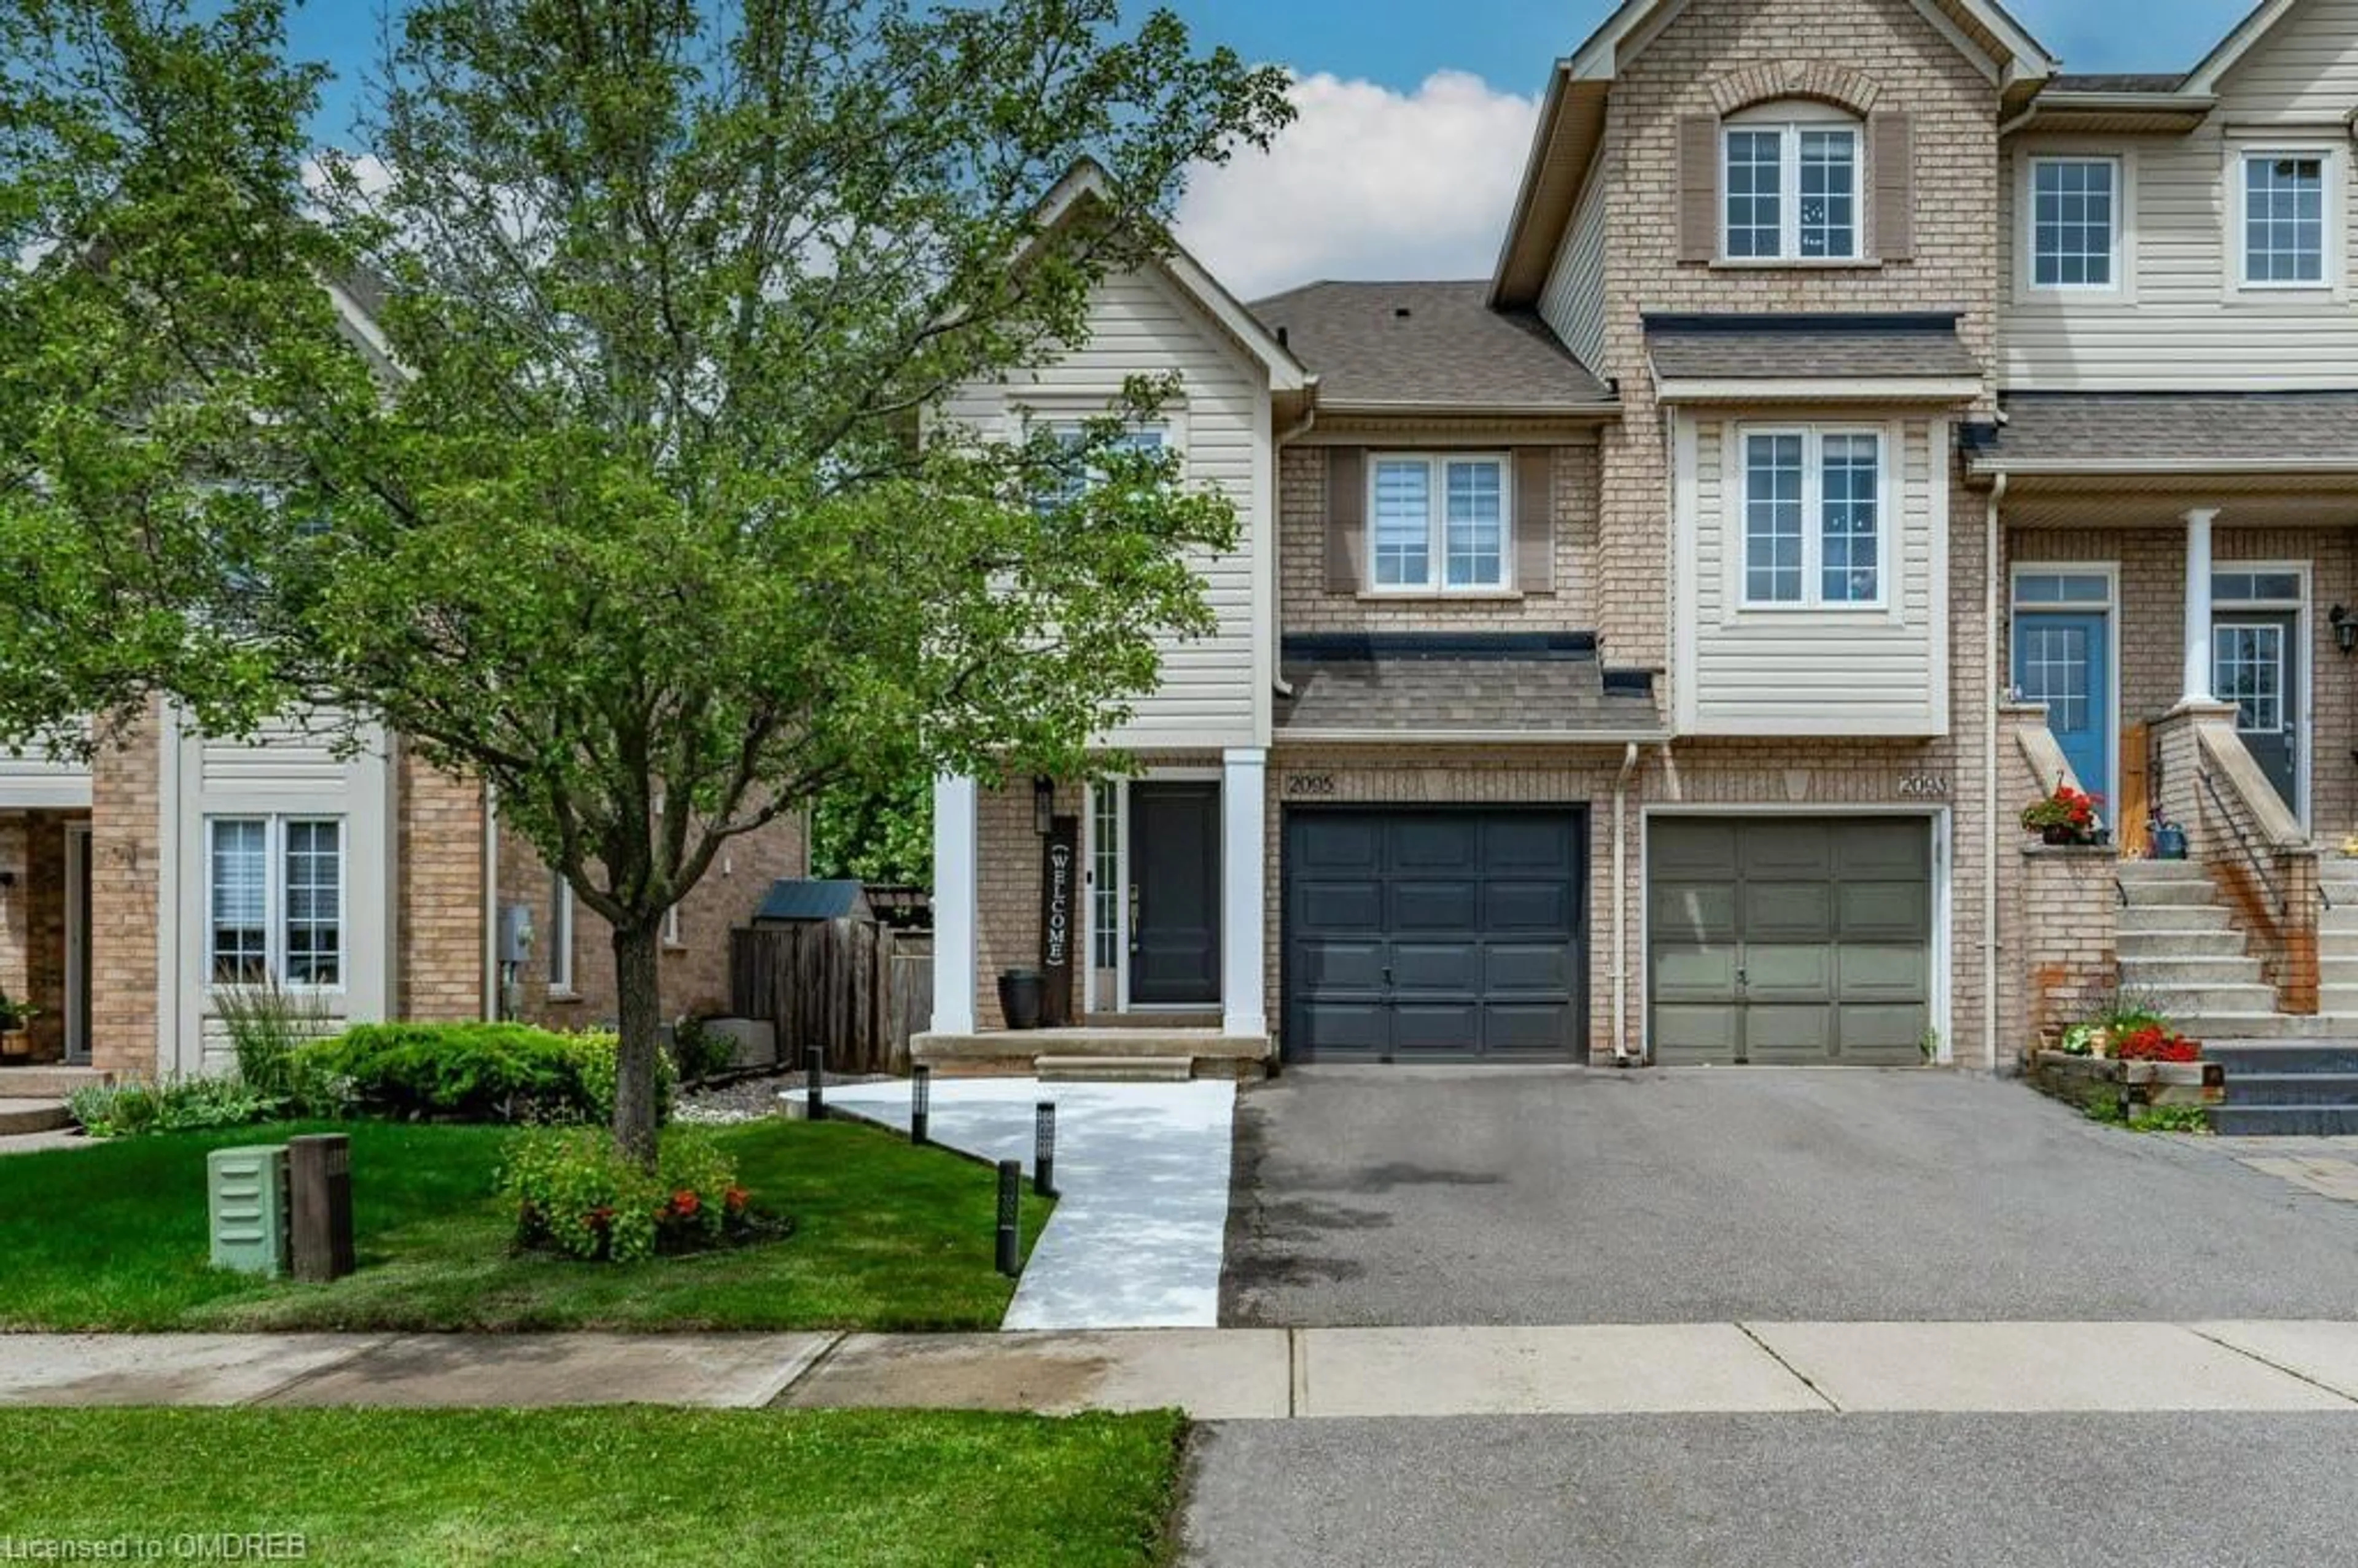 Home with brick exterior material for 2095 Glenhampton Rd, Oakville Ontario L6M 3W9